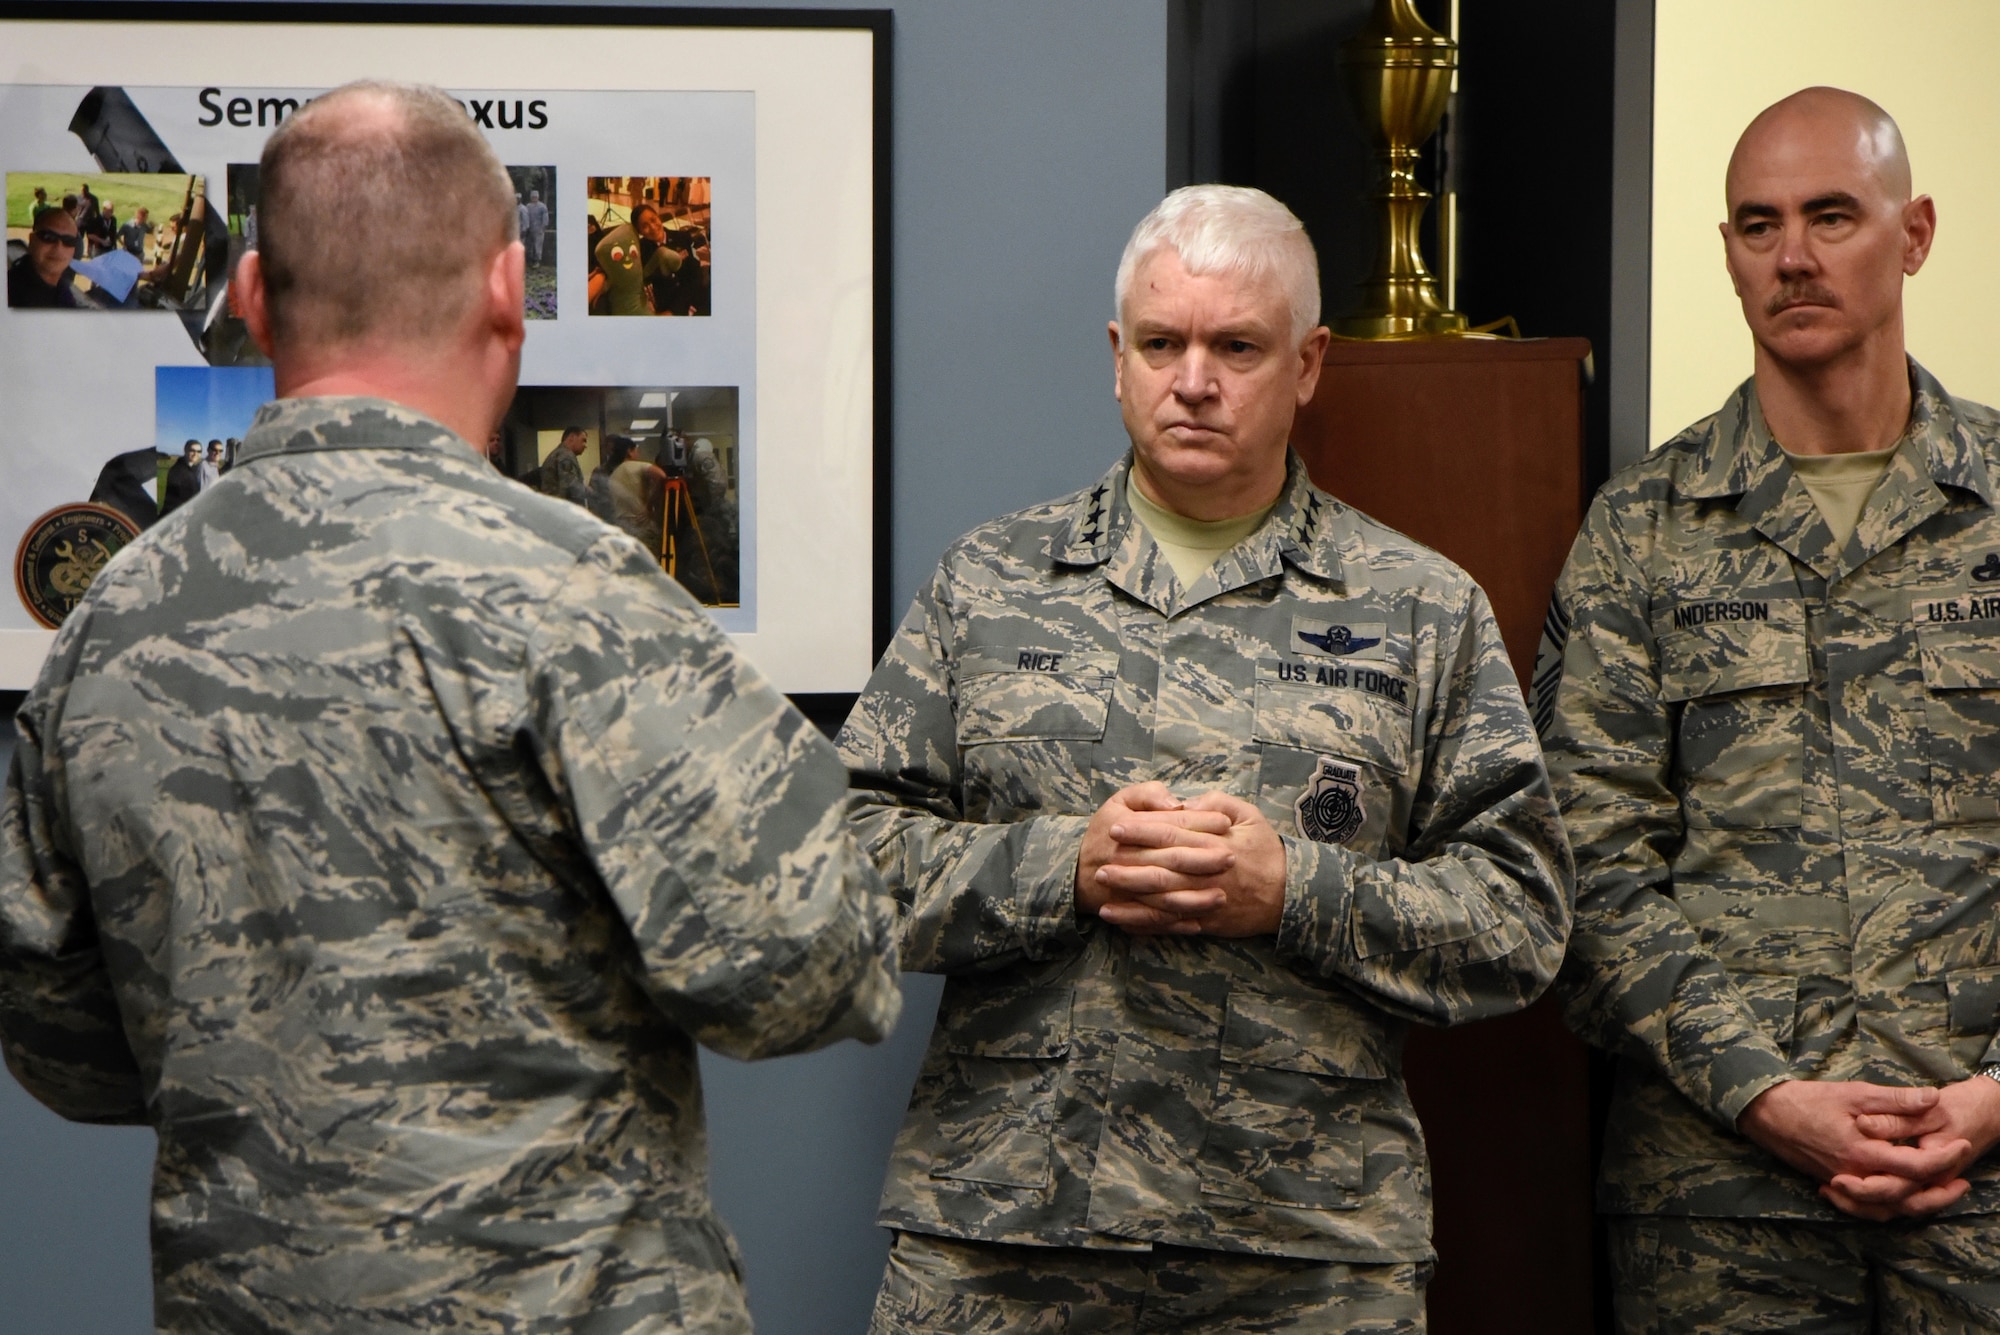 Lt. Gen. L. Scott Rice, the Director of the Air National Guard, and Command Chief Master Sgt. Ronald C. Anderson Jr., Command Chief Master Sergeant of the Air National Guard, listen to a question from a 235th Civil Engineering Flight member, February 10, 2018 while touring Warfield Air National Guard Base, Middle River, Md.